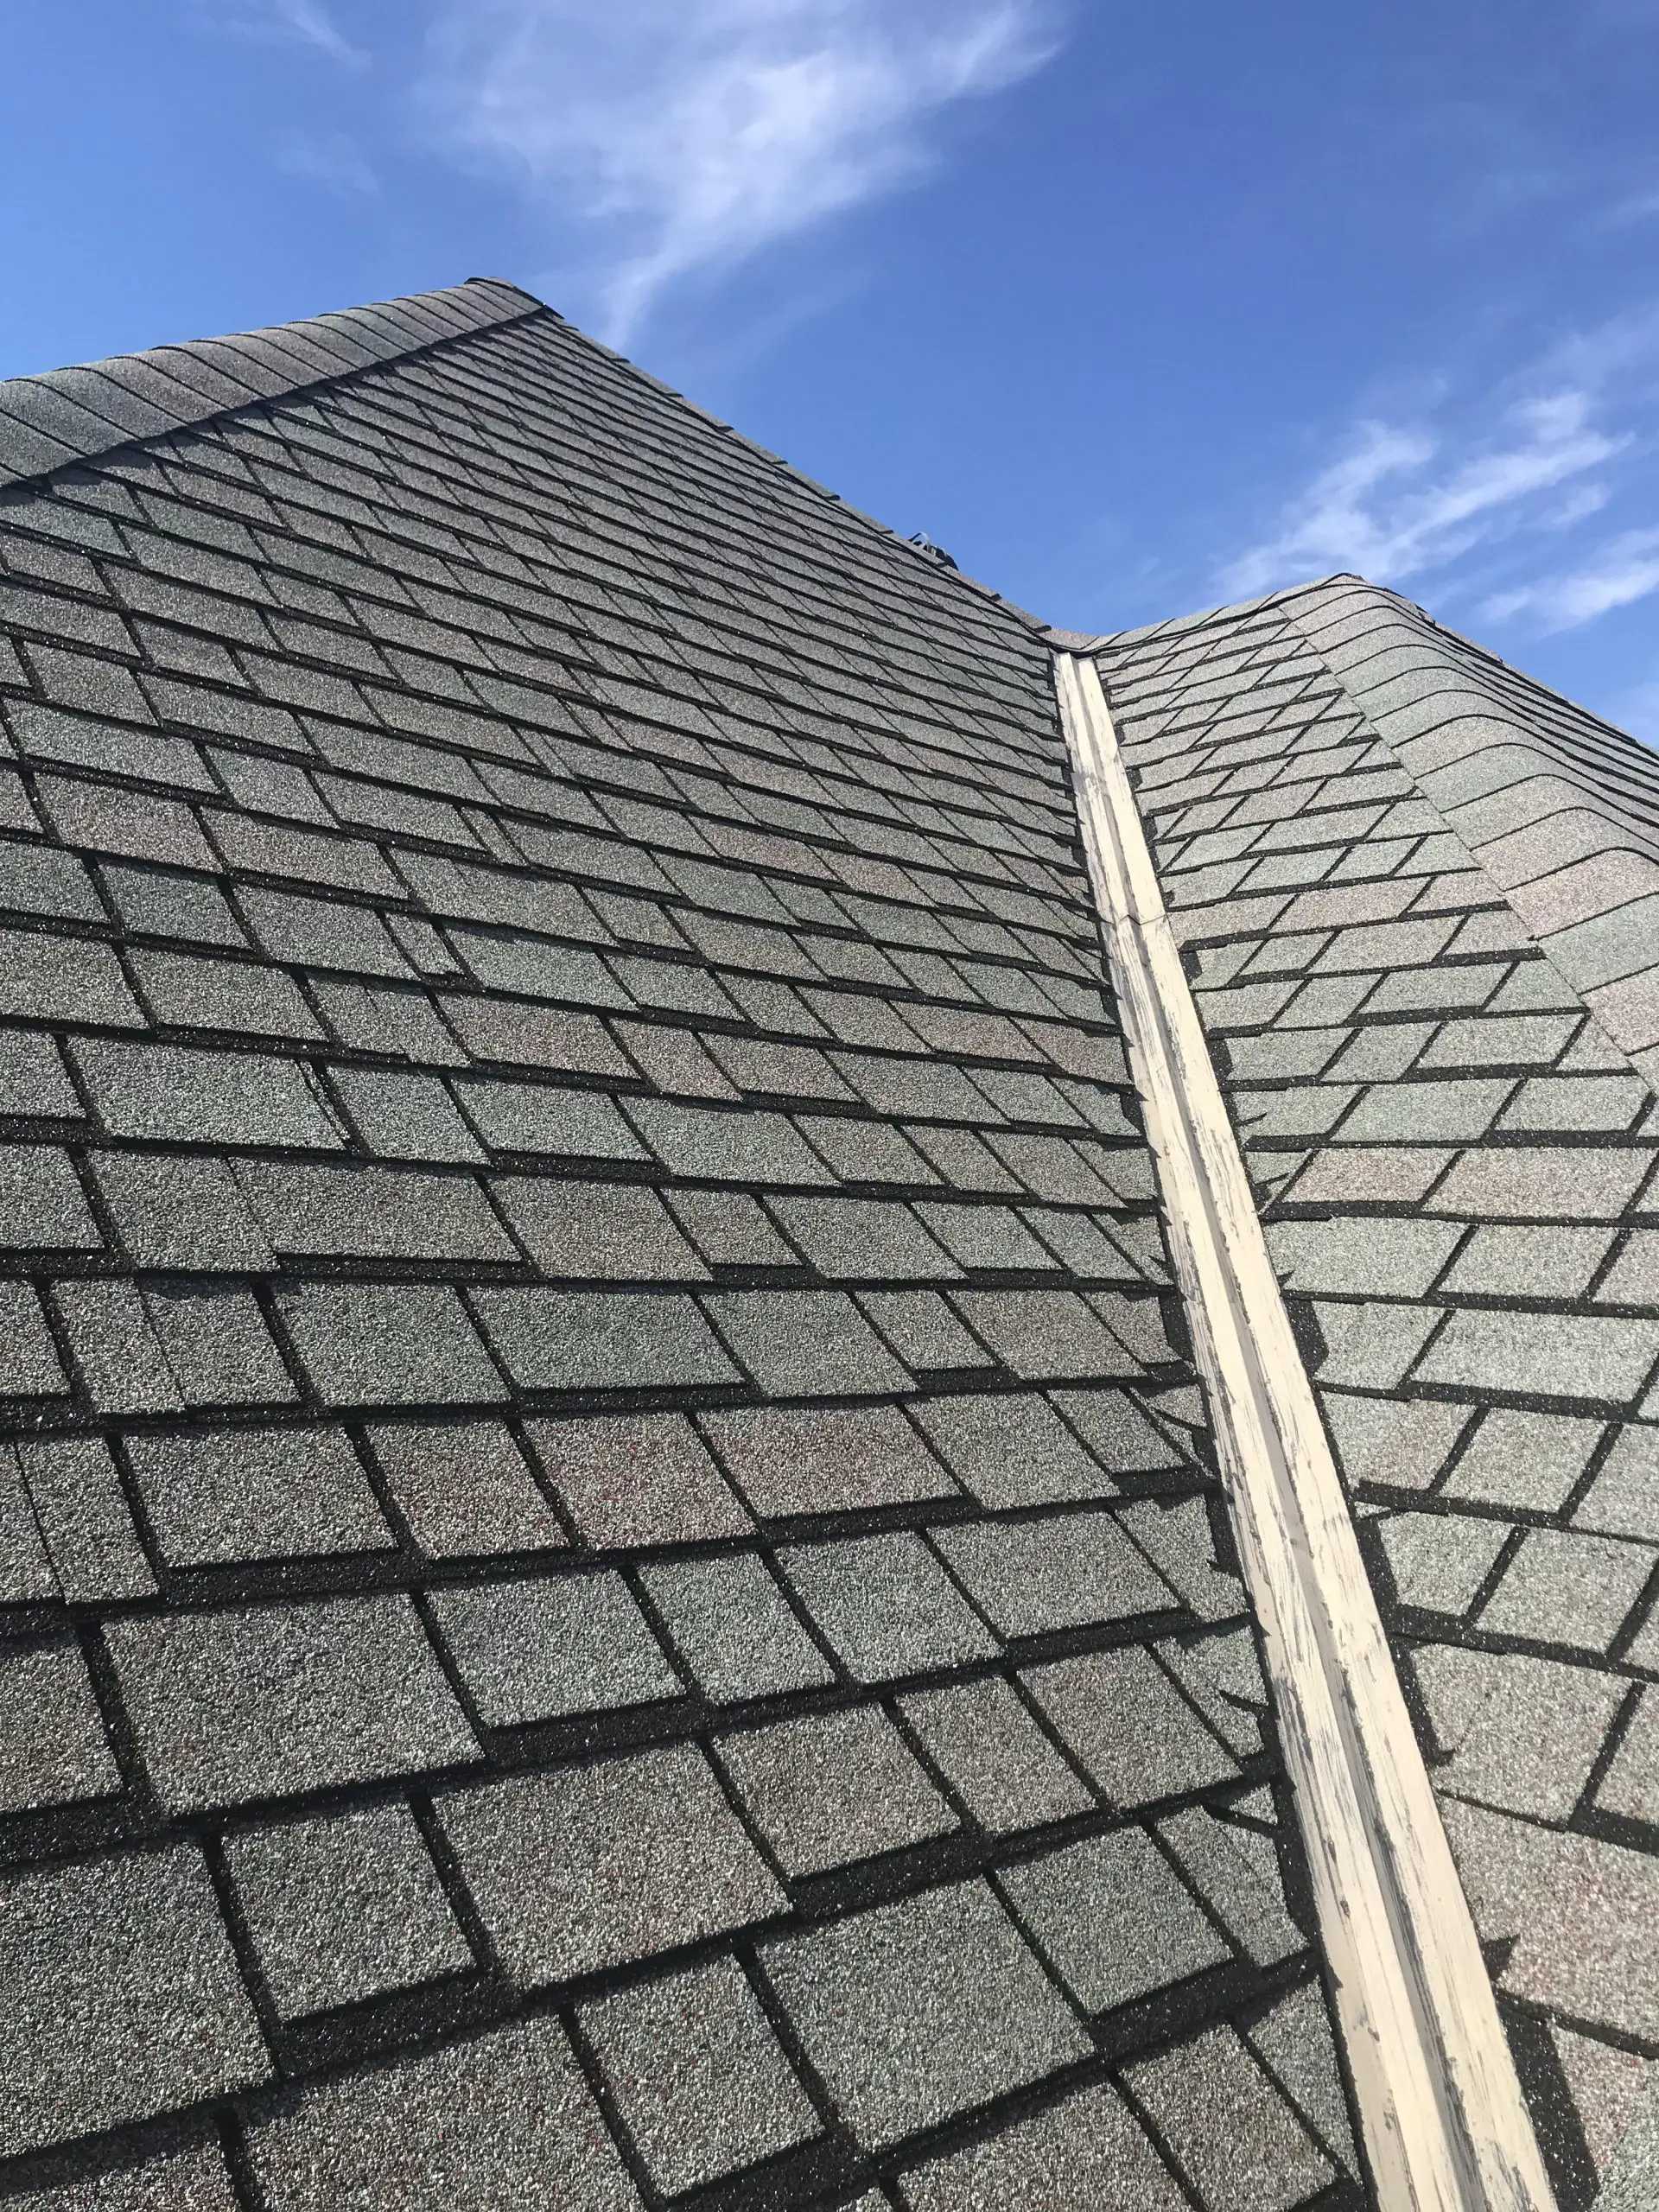 Can anyone help identify what type of shingle this is ...